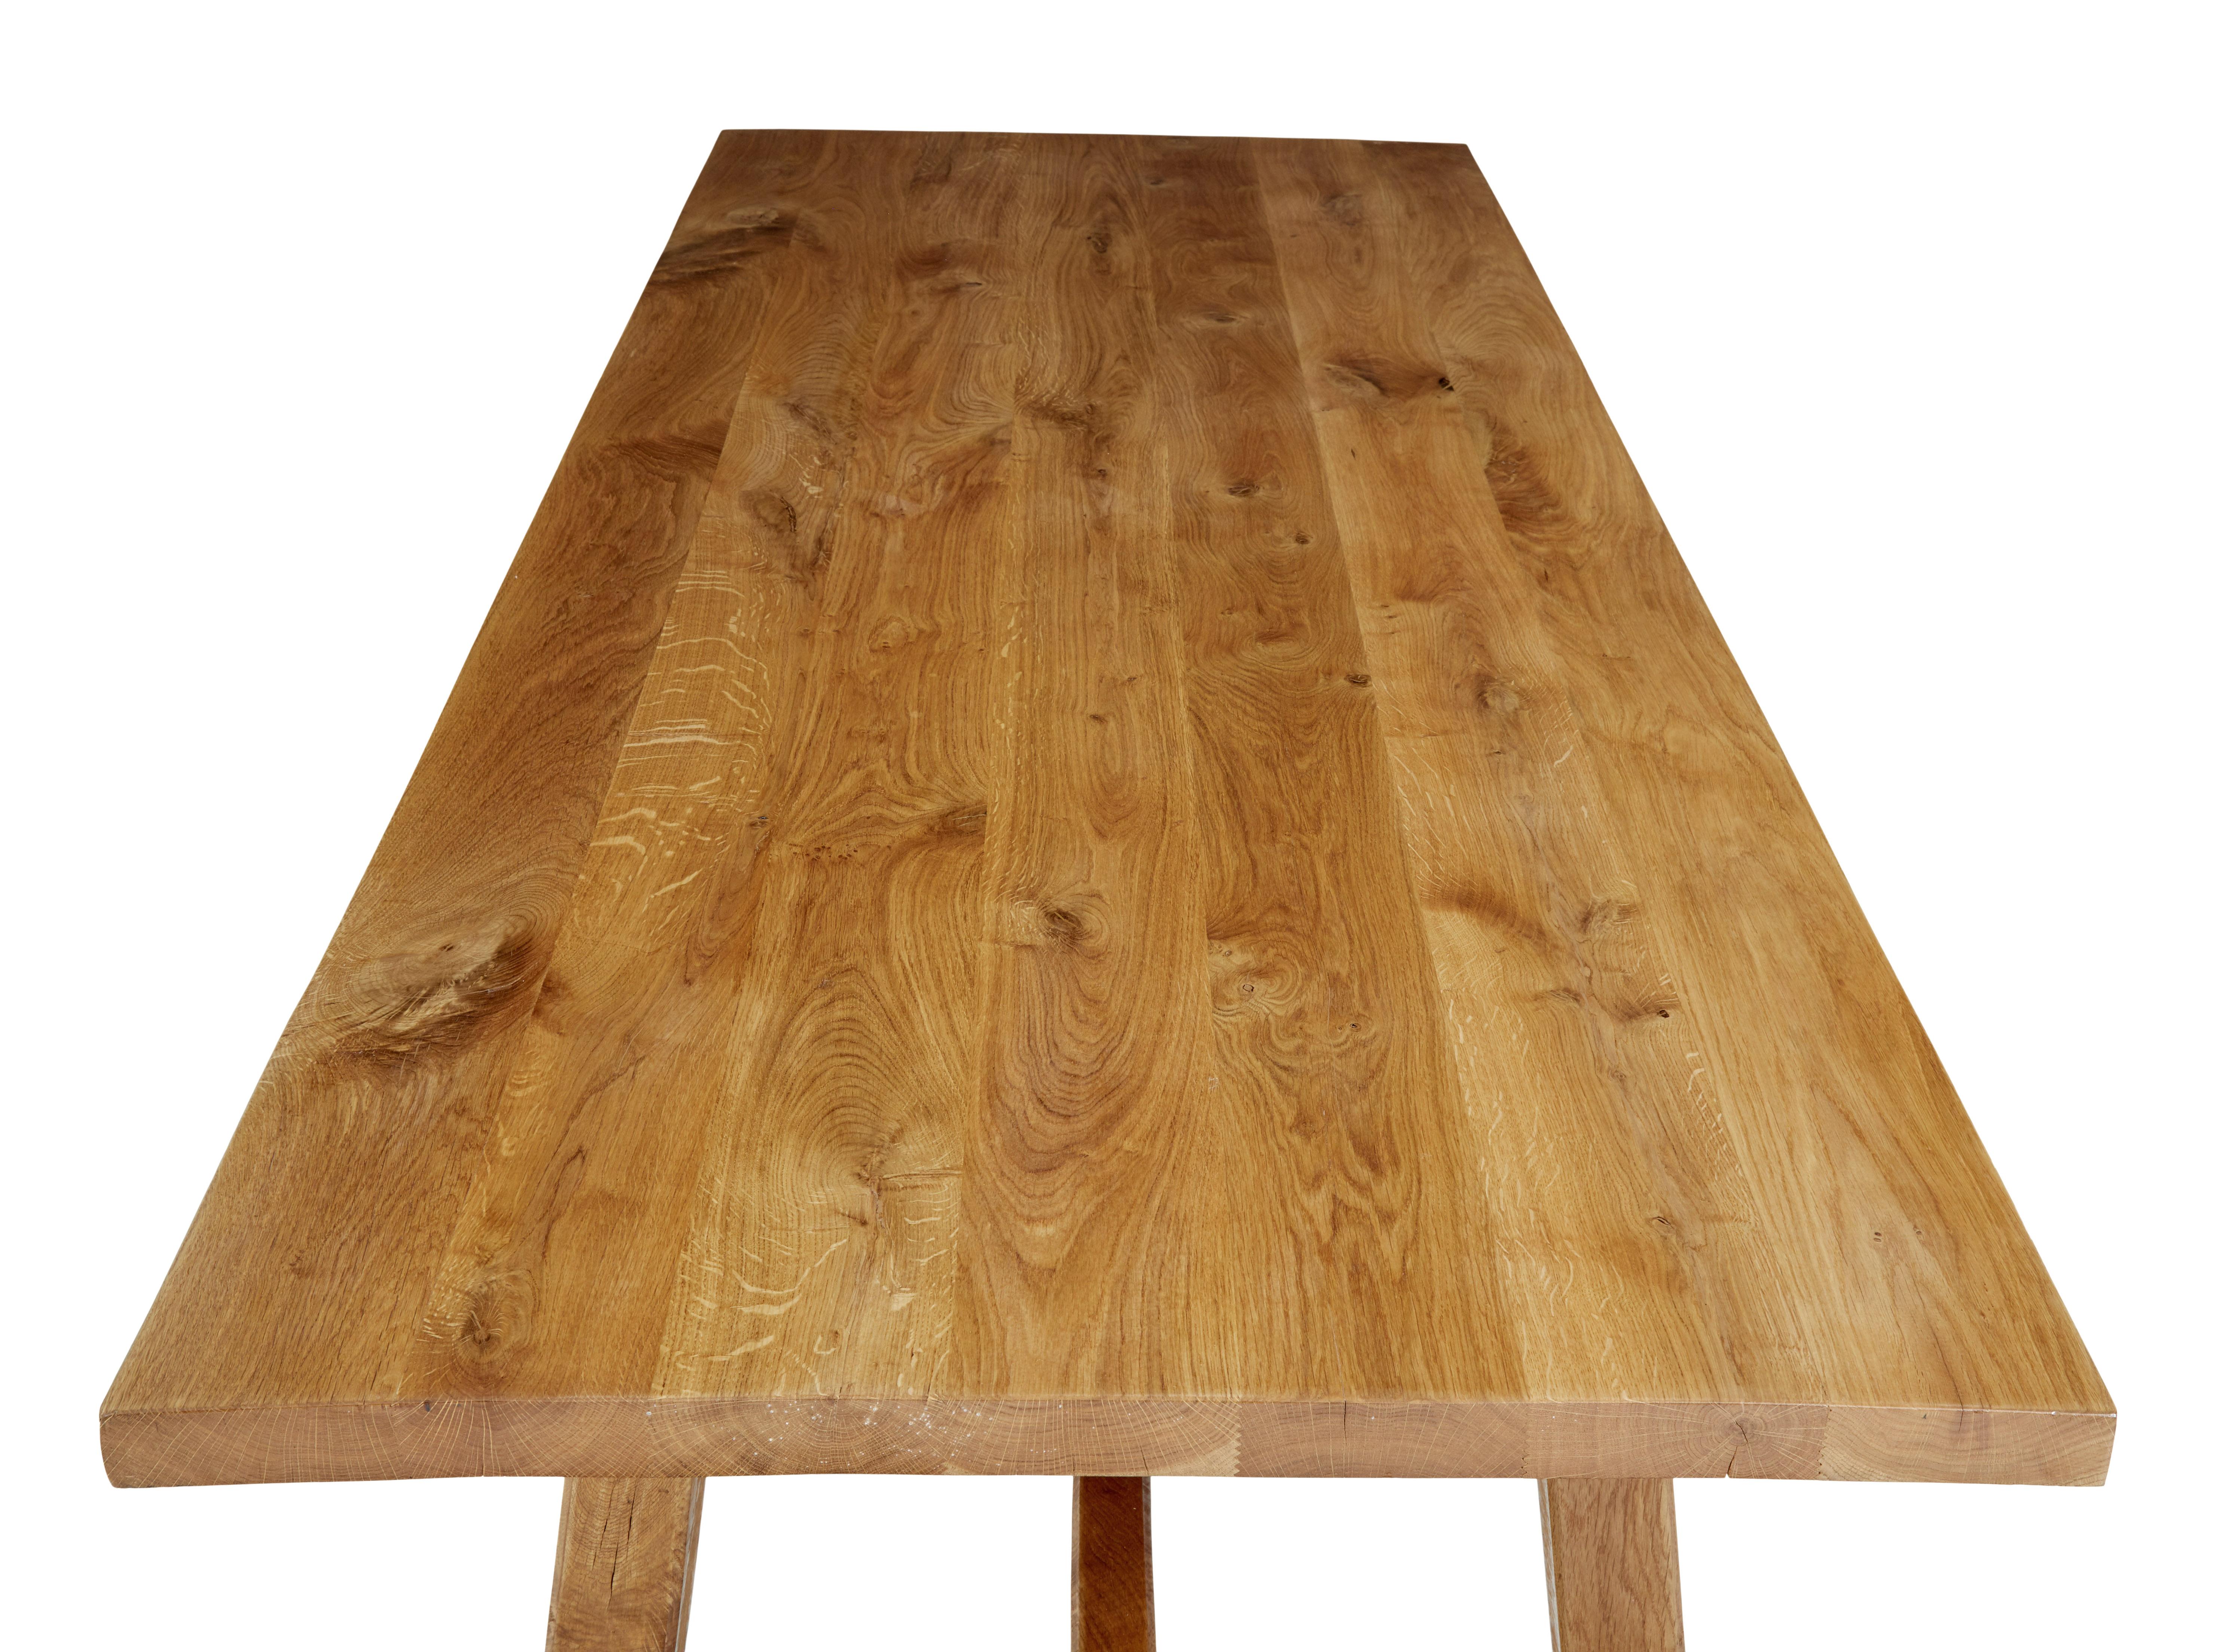 Swedish Impressive Solid Oak Dining Table and Benches by Garbo